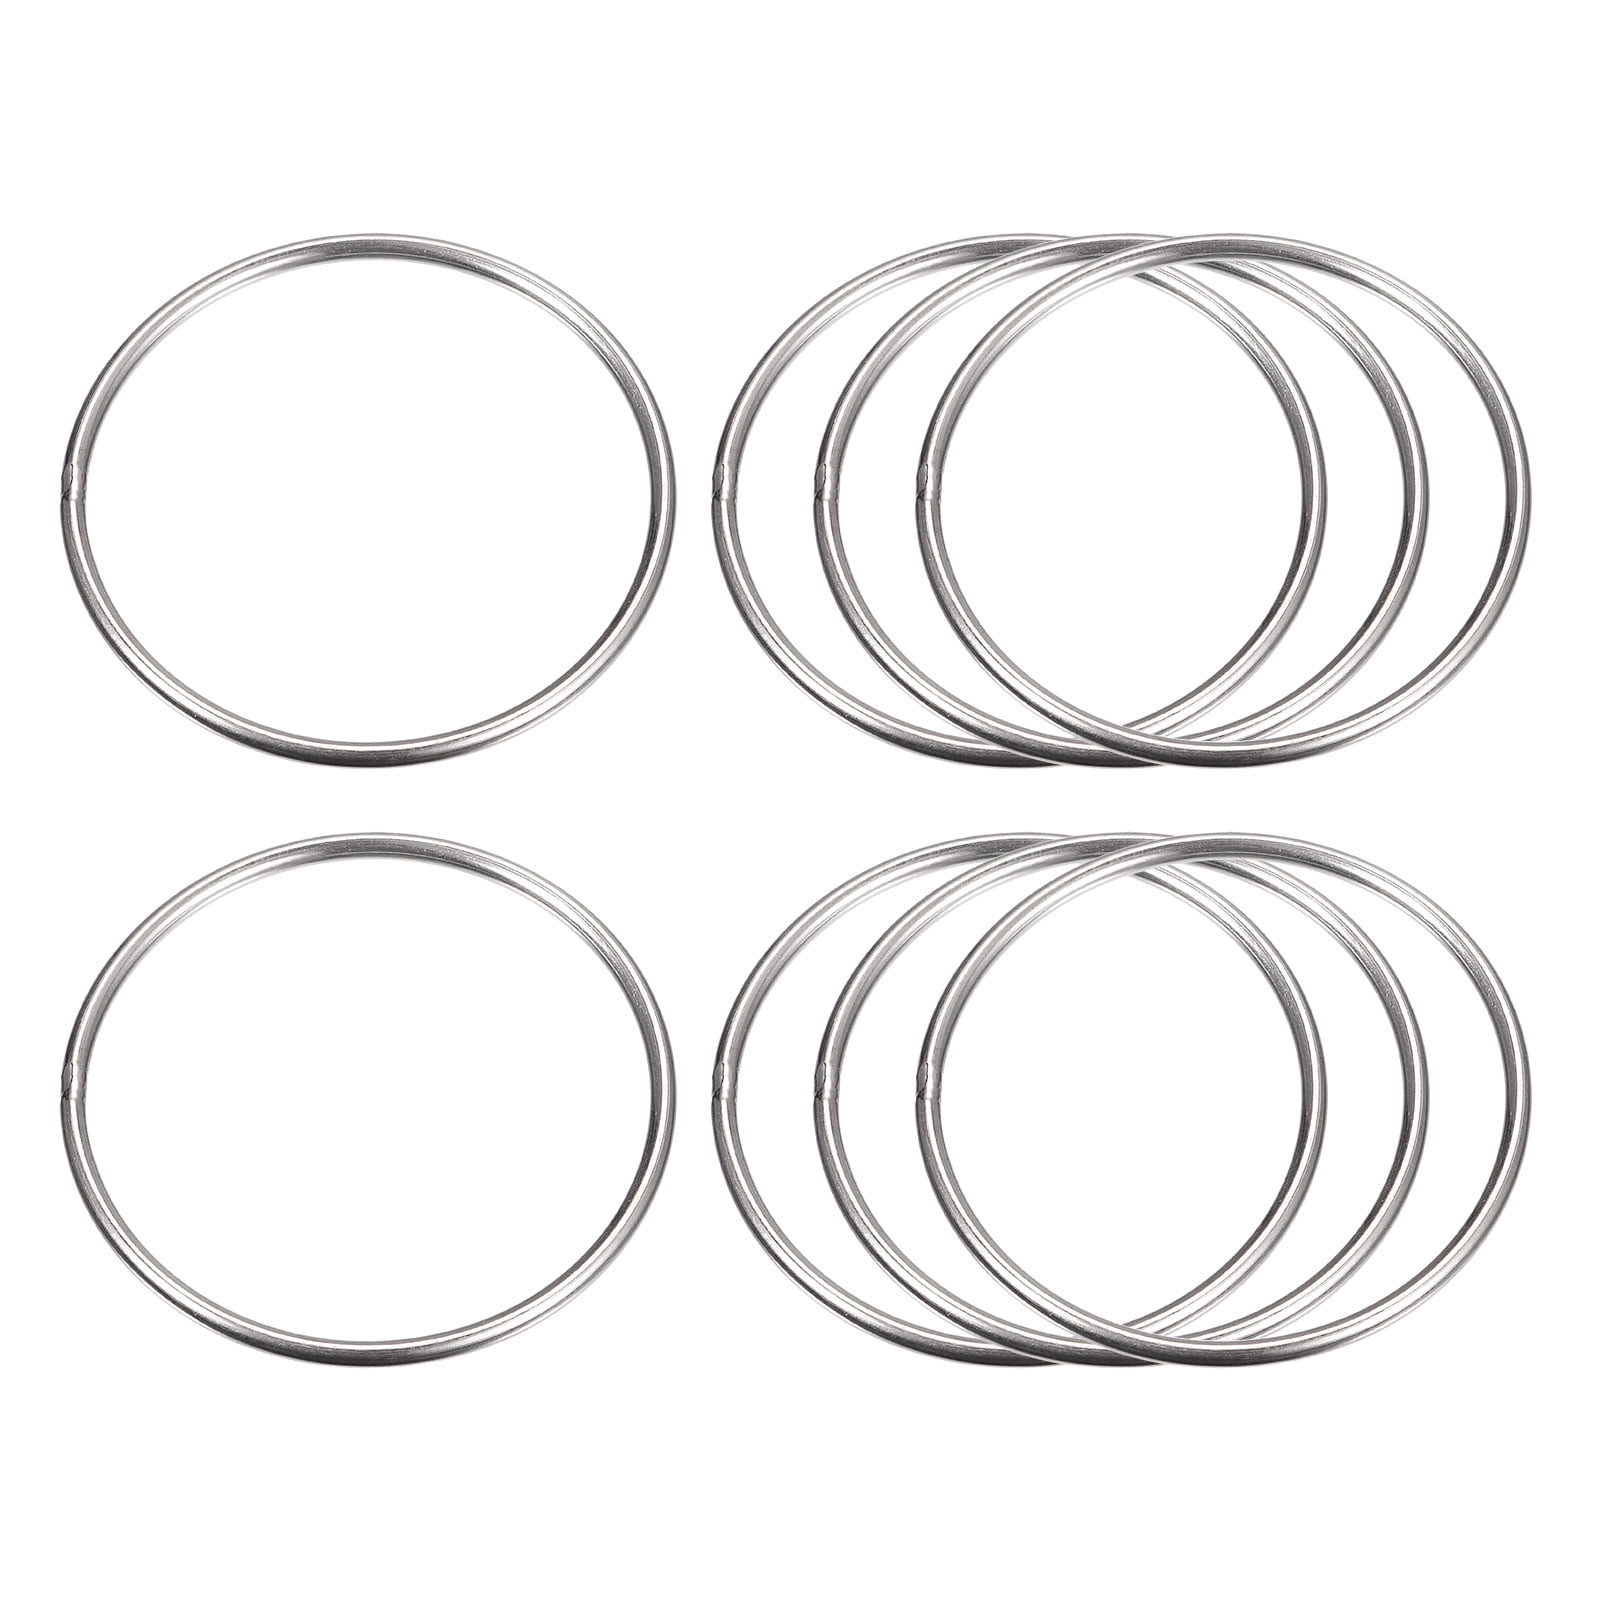 Stainless Steel O Rings, 5 Pack 80mm Outer Dia. 4mm Thickness Welded O-rings